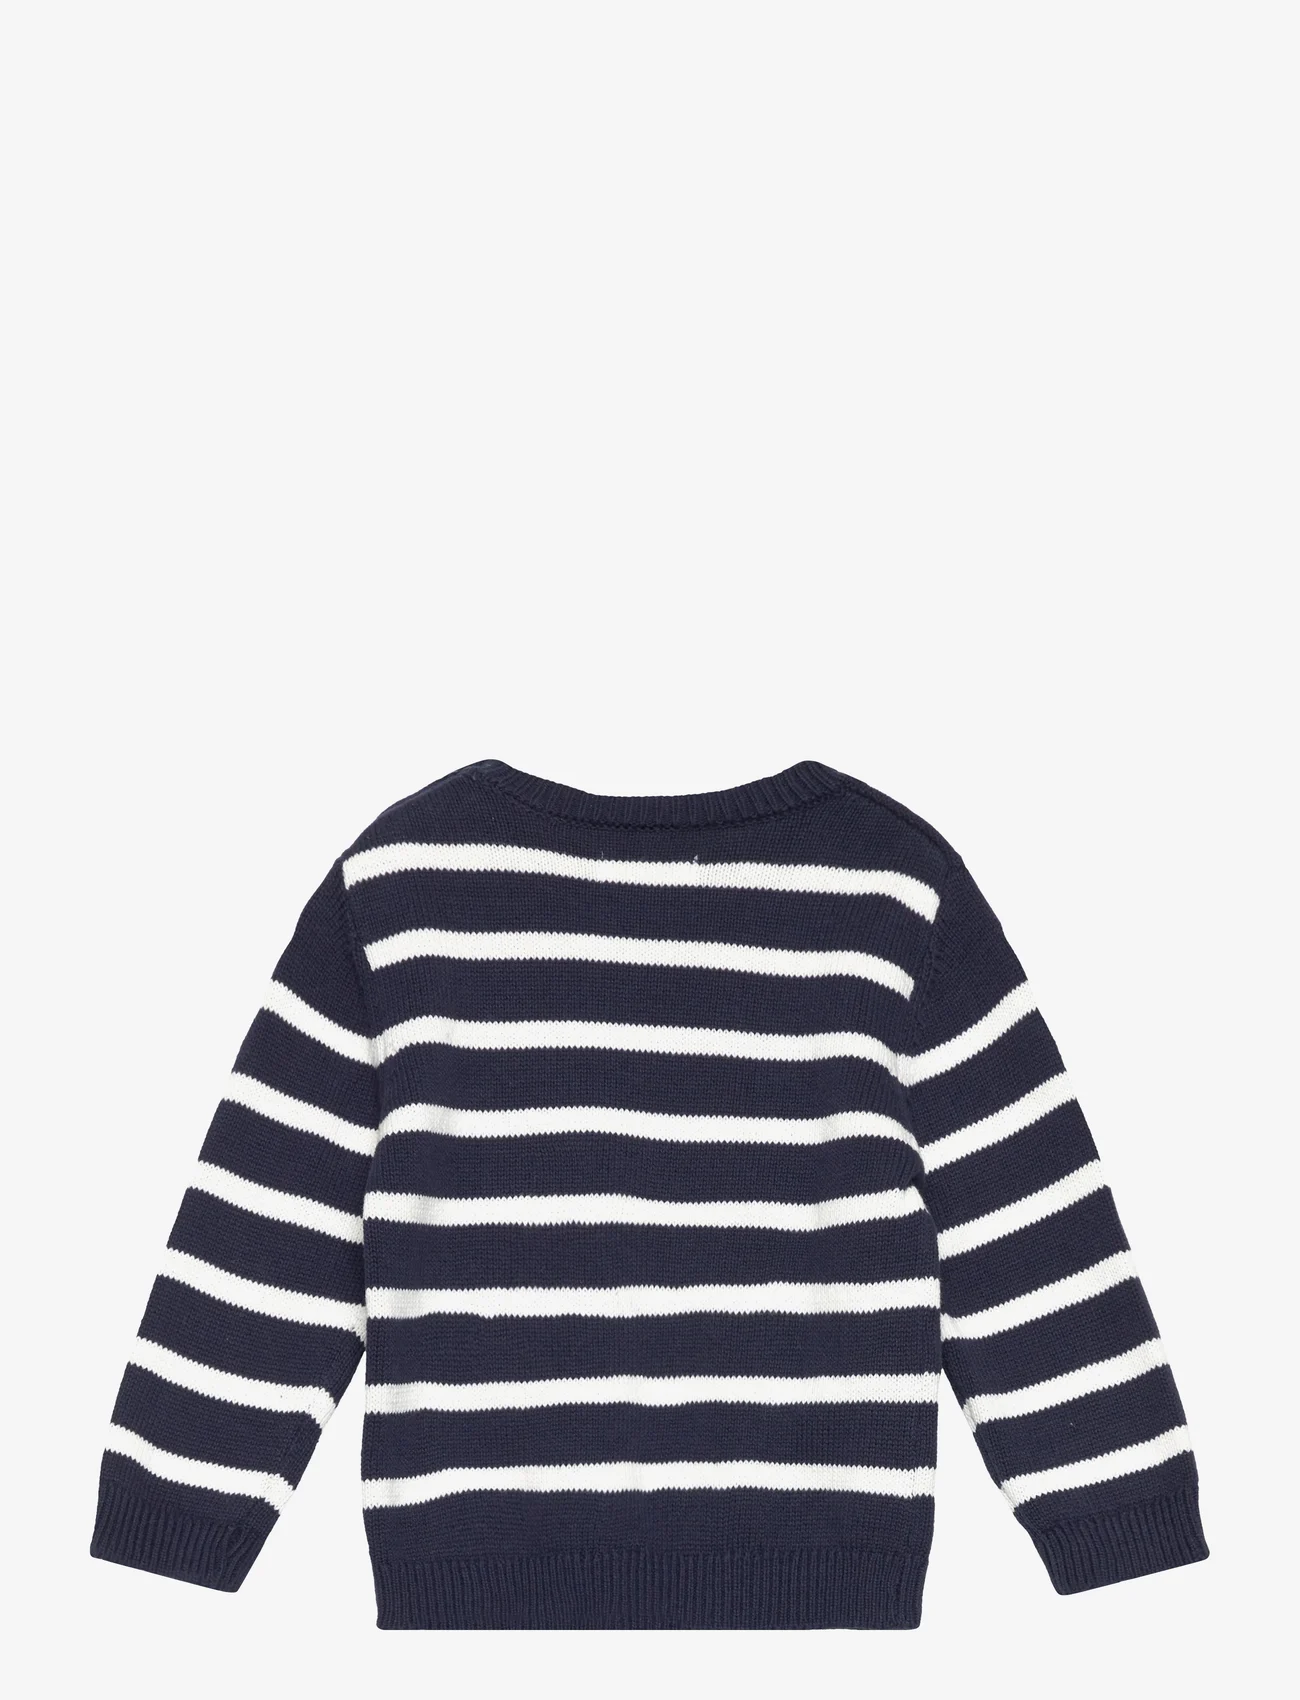 Mango - Striped knit sweater - pullover - navy - 1